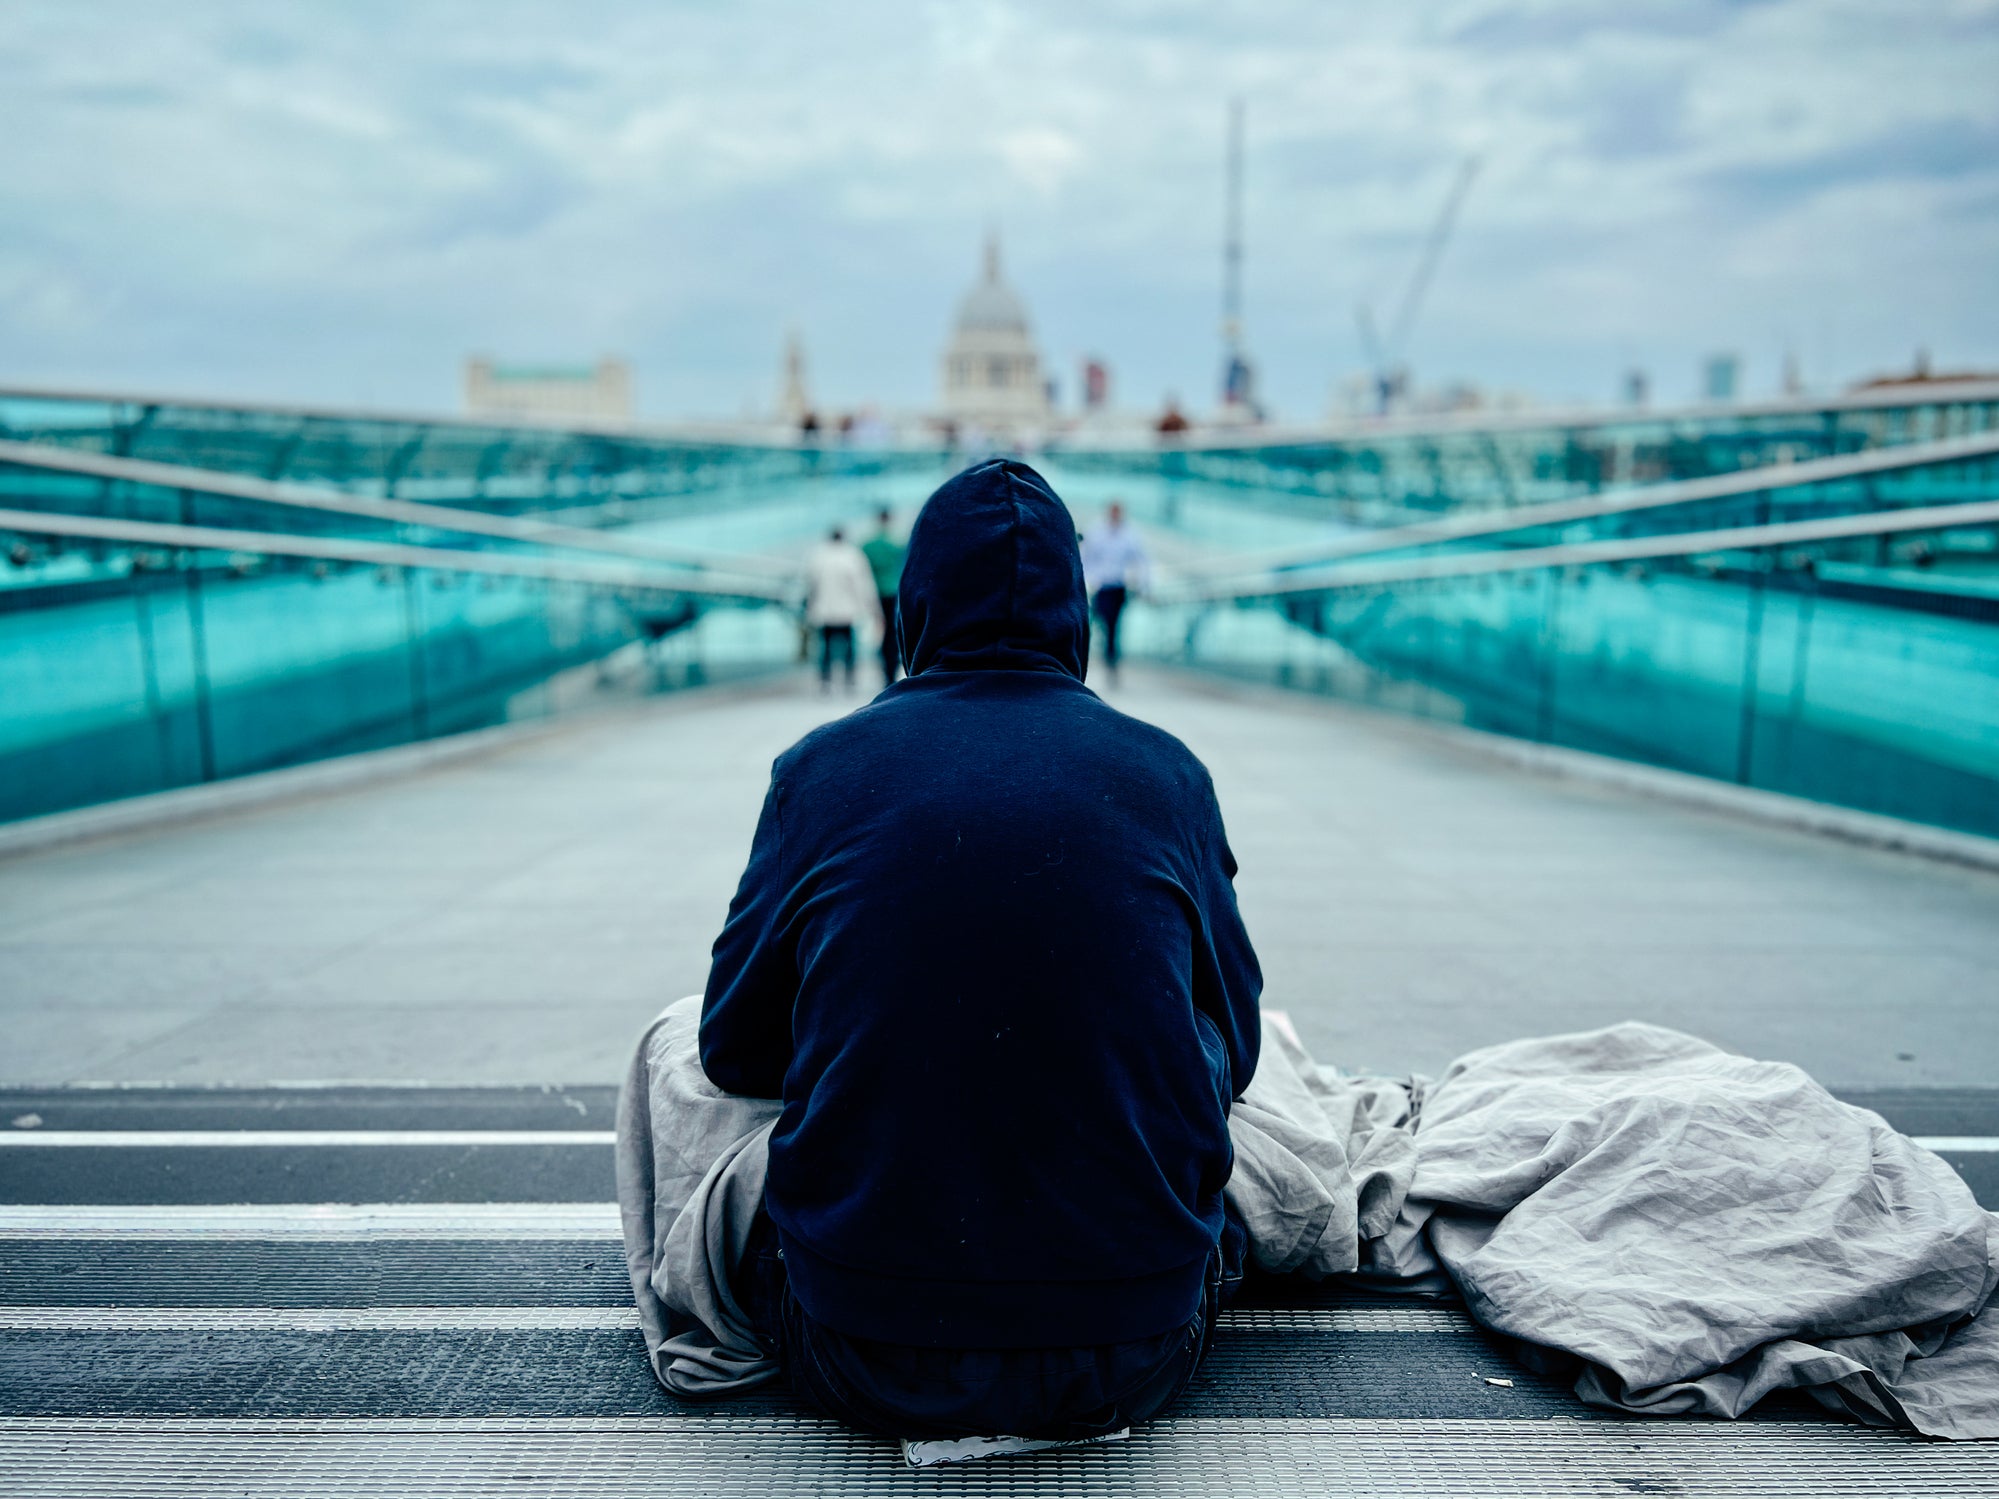 The number of people sleeping rough has been increasing in the pas year